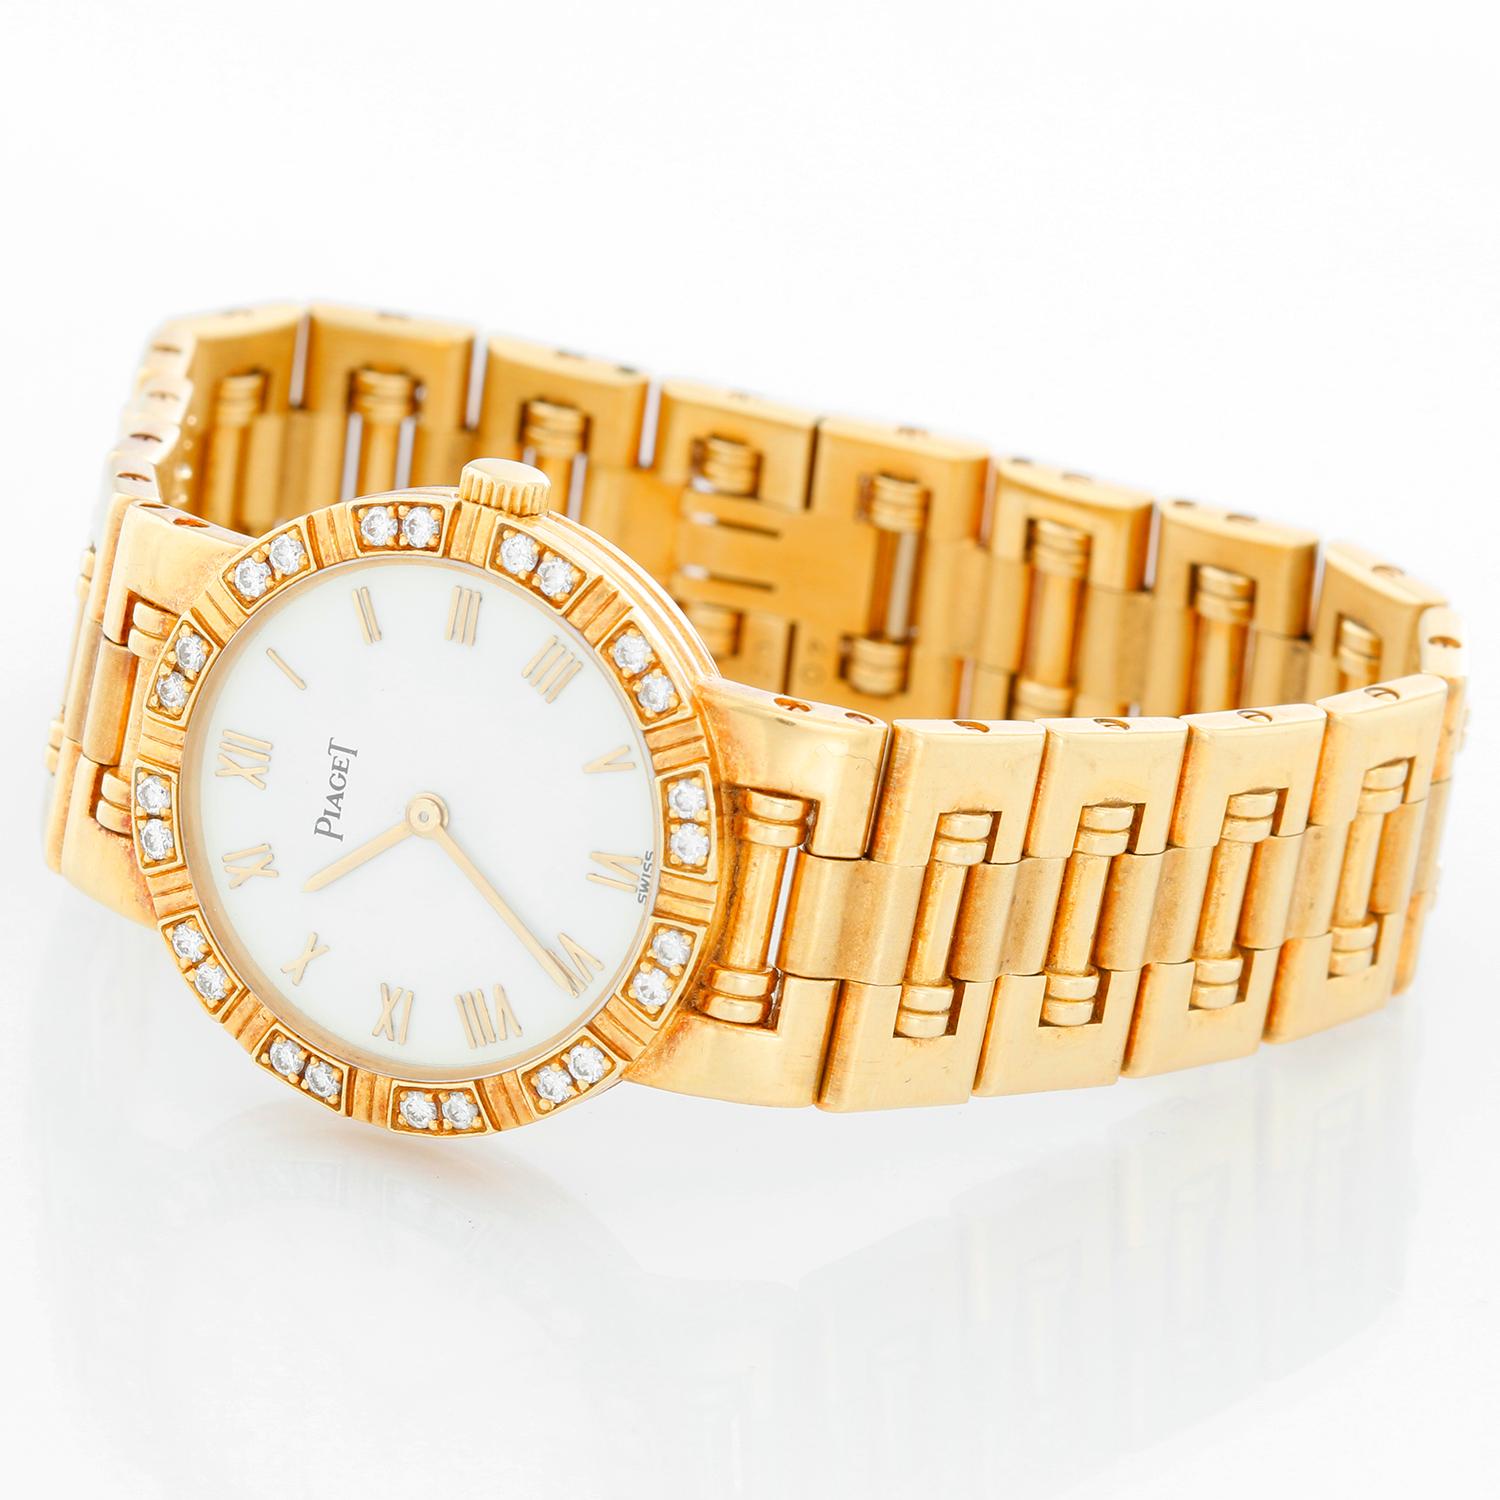 Piaget Dancer 18K Yellow Gold Ladies Watch - Quartz. 18K Yellow gold with diamond bezel (23 mm). White dial with gold Roman numerals. Piaget link bracelet with hinged clasp; fits up to a 5 3/4. Pre-owned with custom box. 